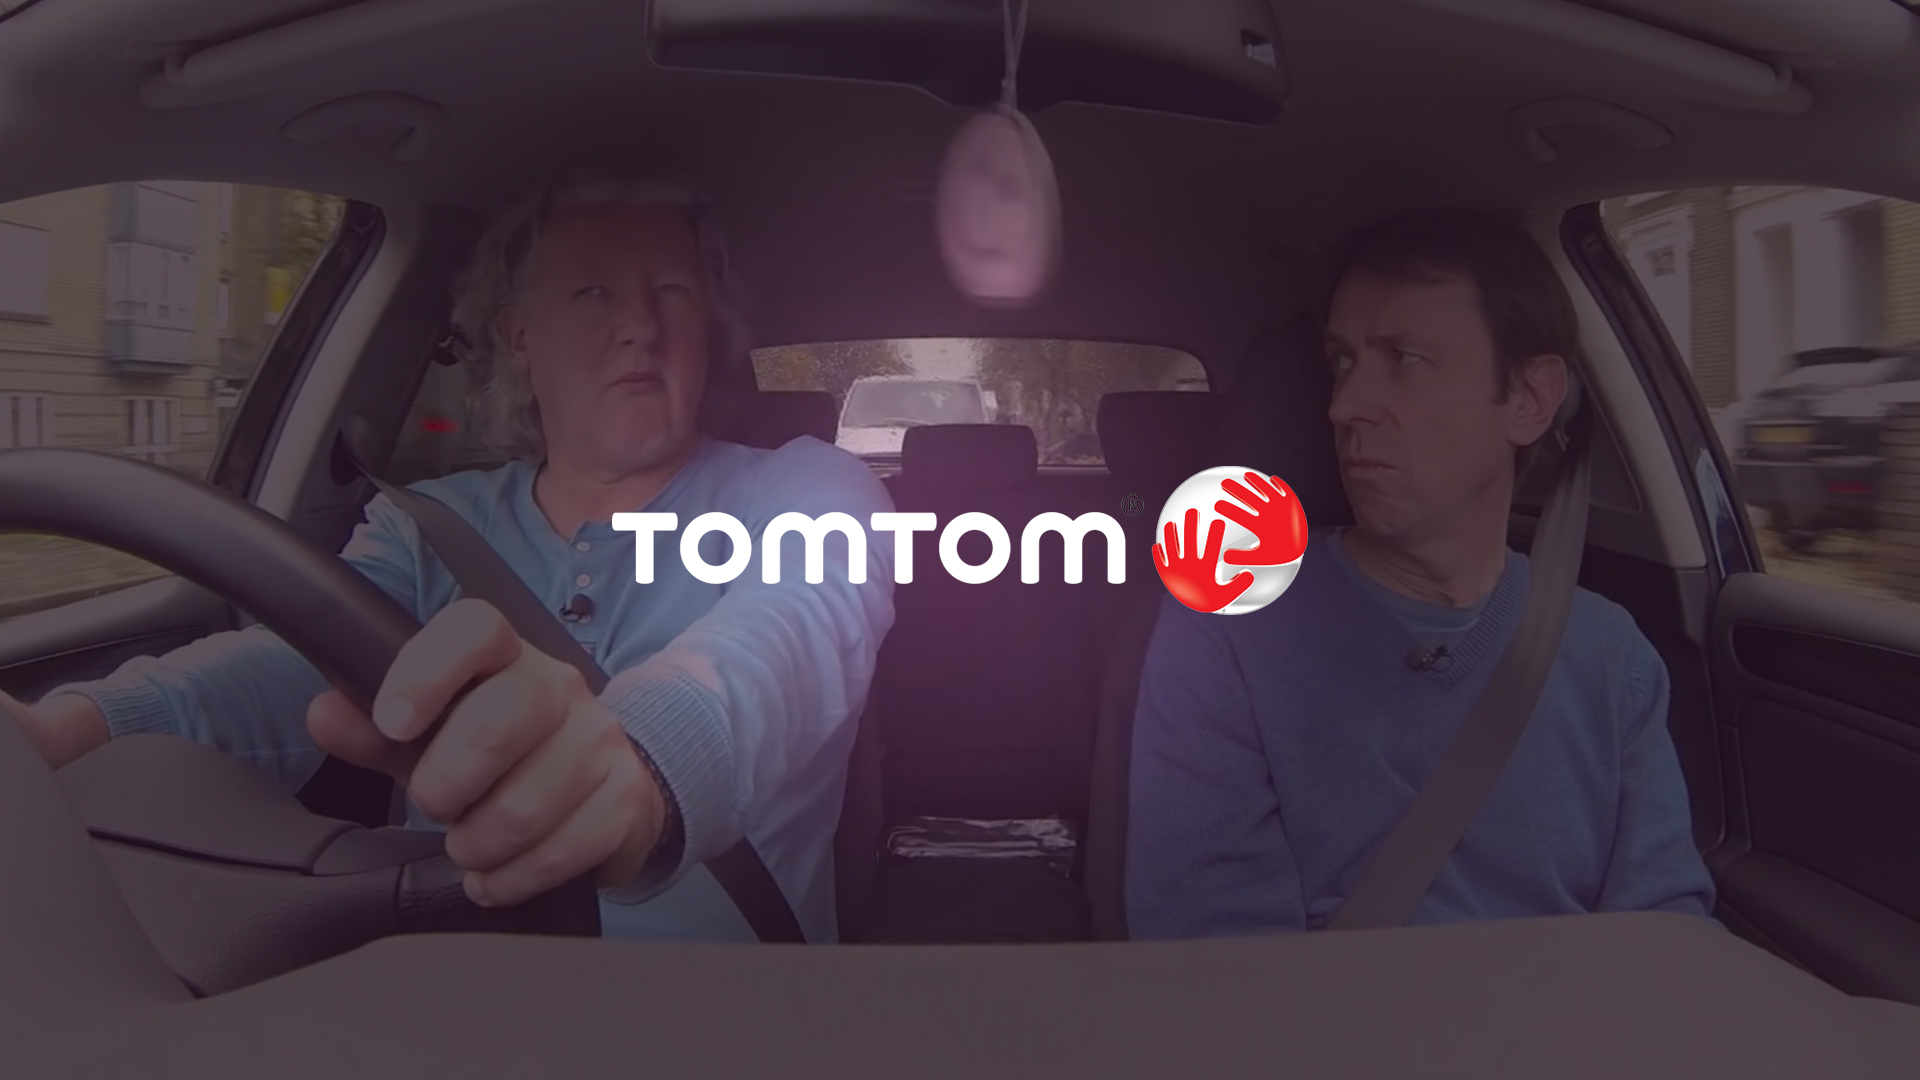 THE TOMTOM